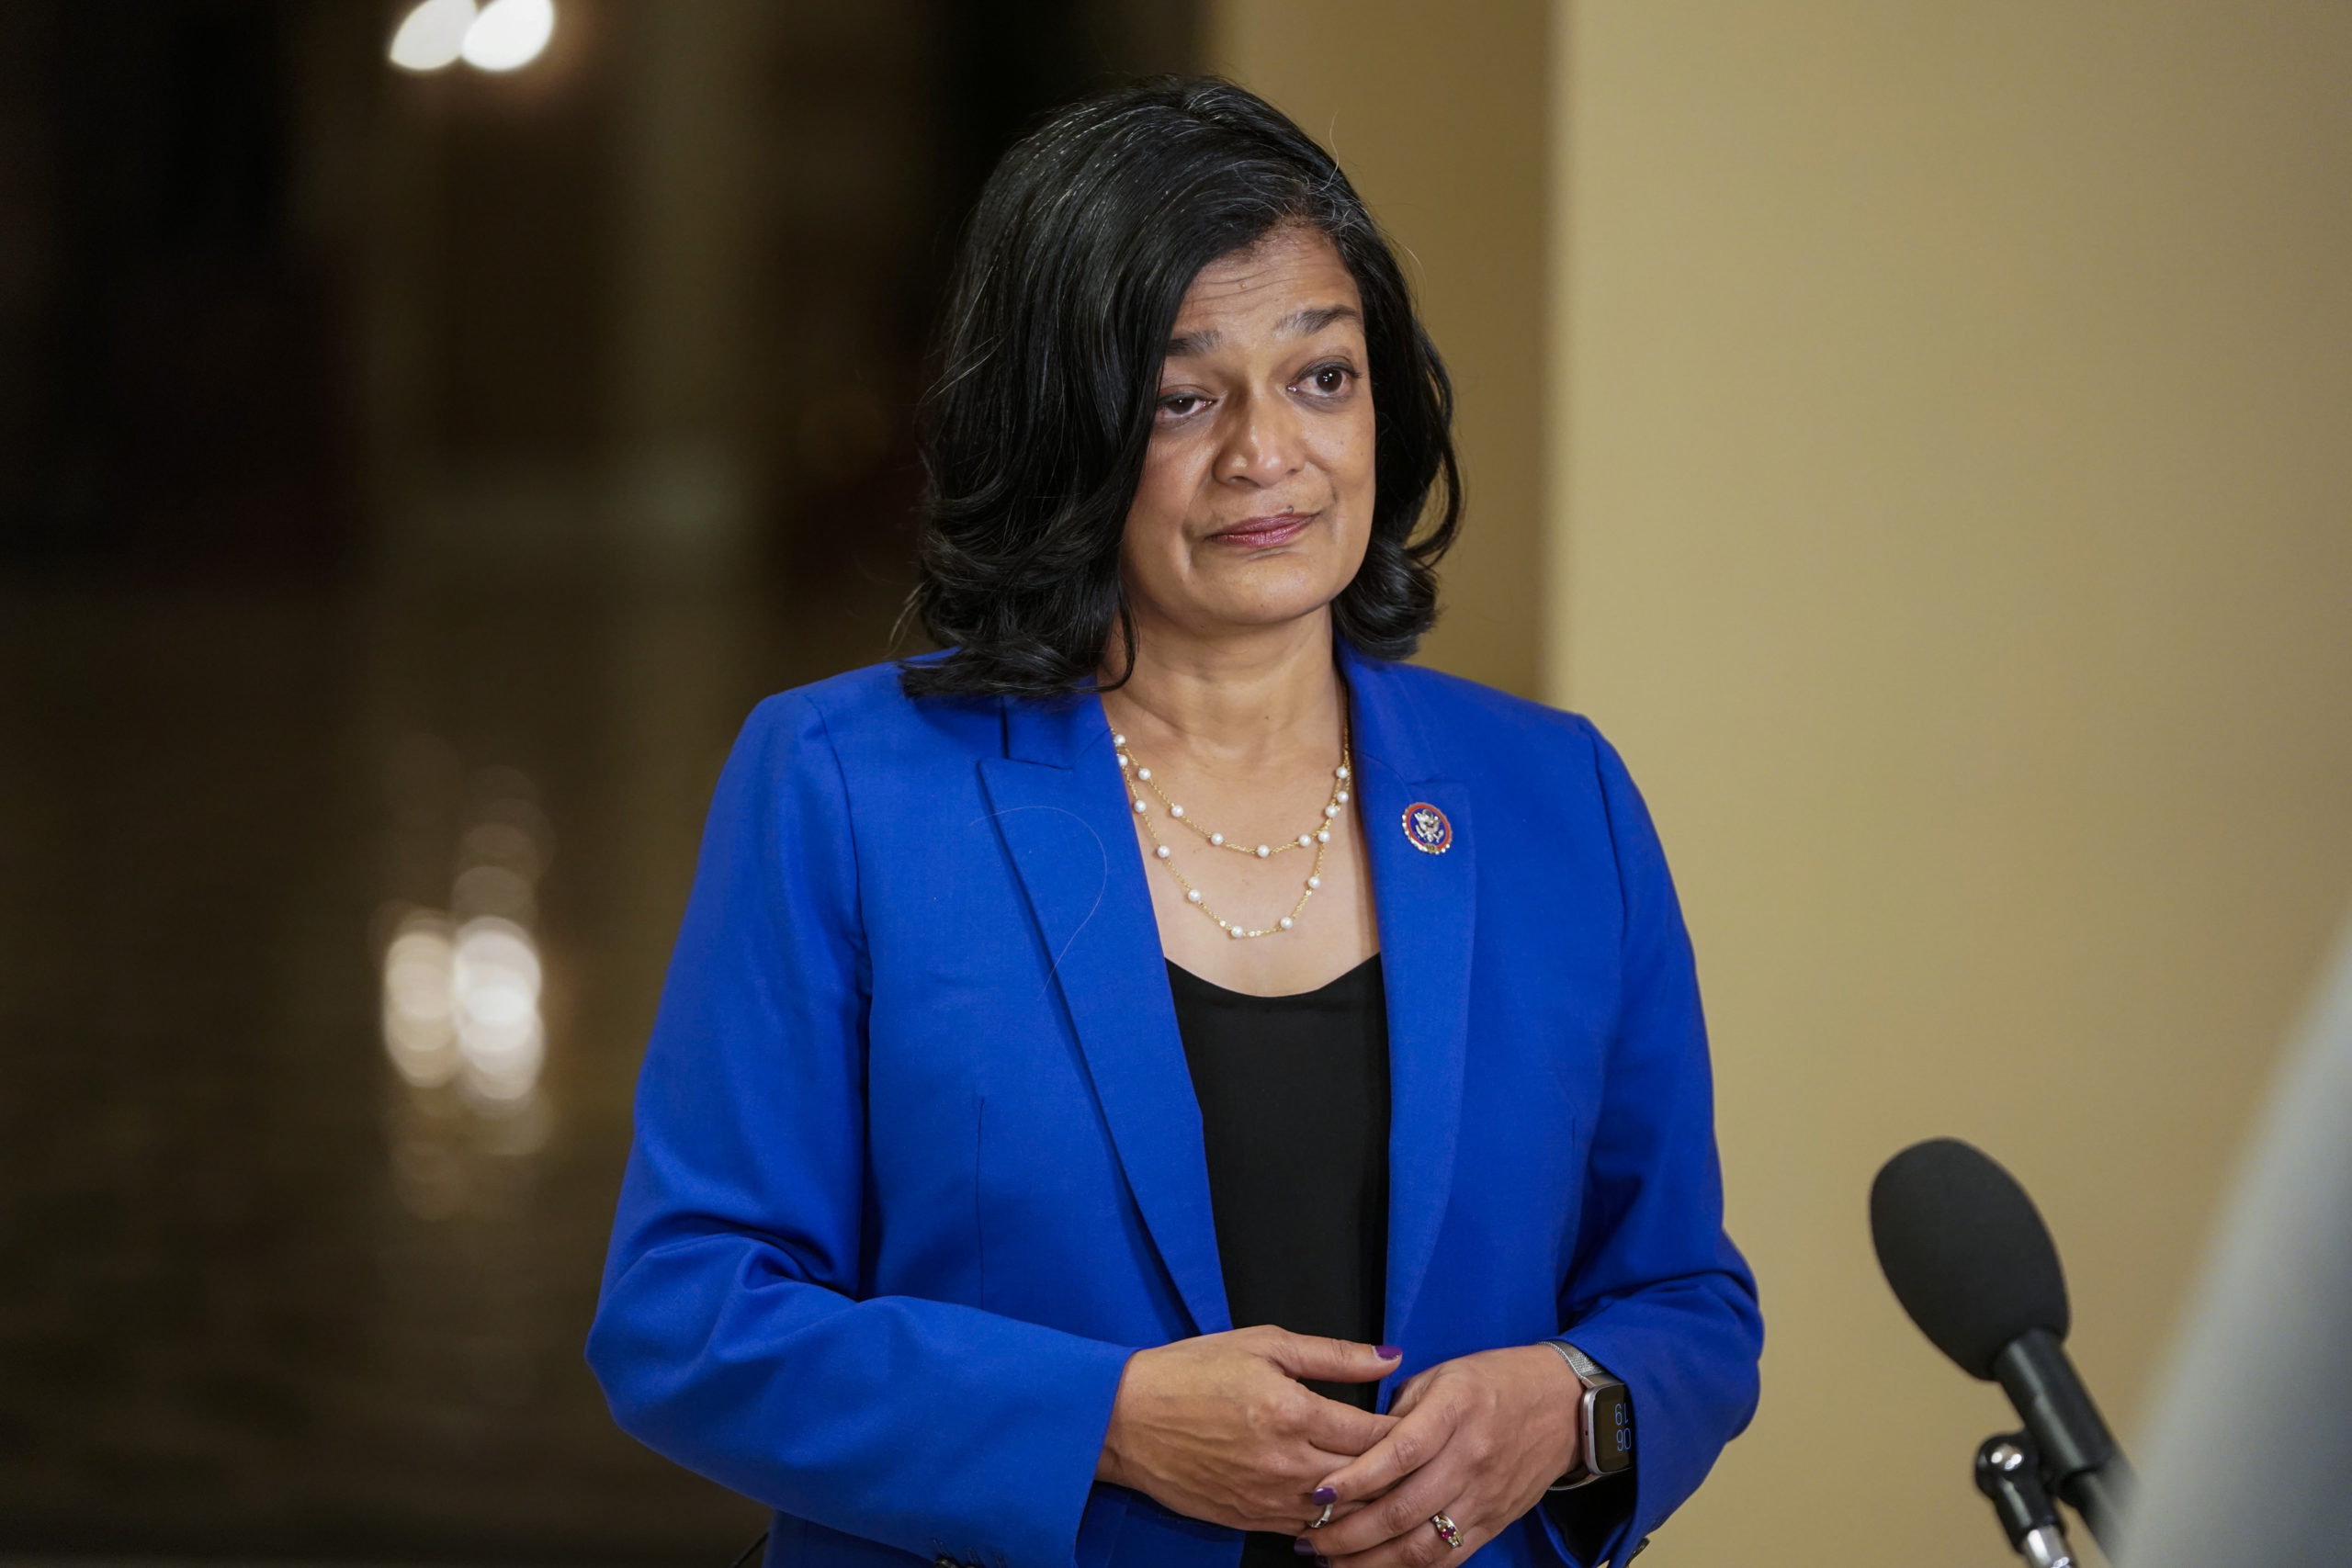 Rep. Pramila Jayapal gives an interview Thursday. Her caucus has repeatedly blocked the infrastructure bill from passing the House without the budget doing so as well. (Joshua Roberts/Getty Images)